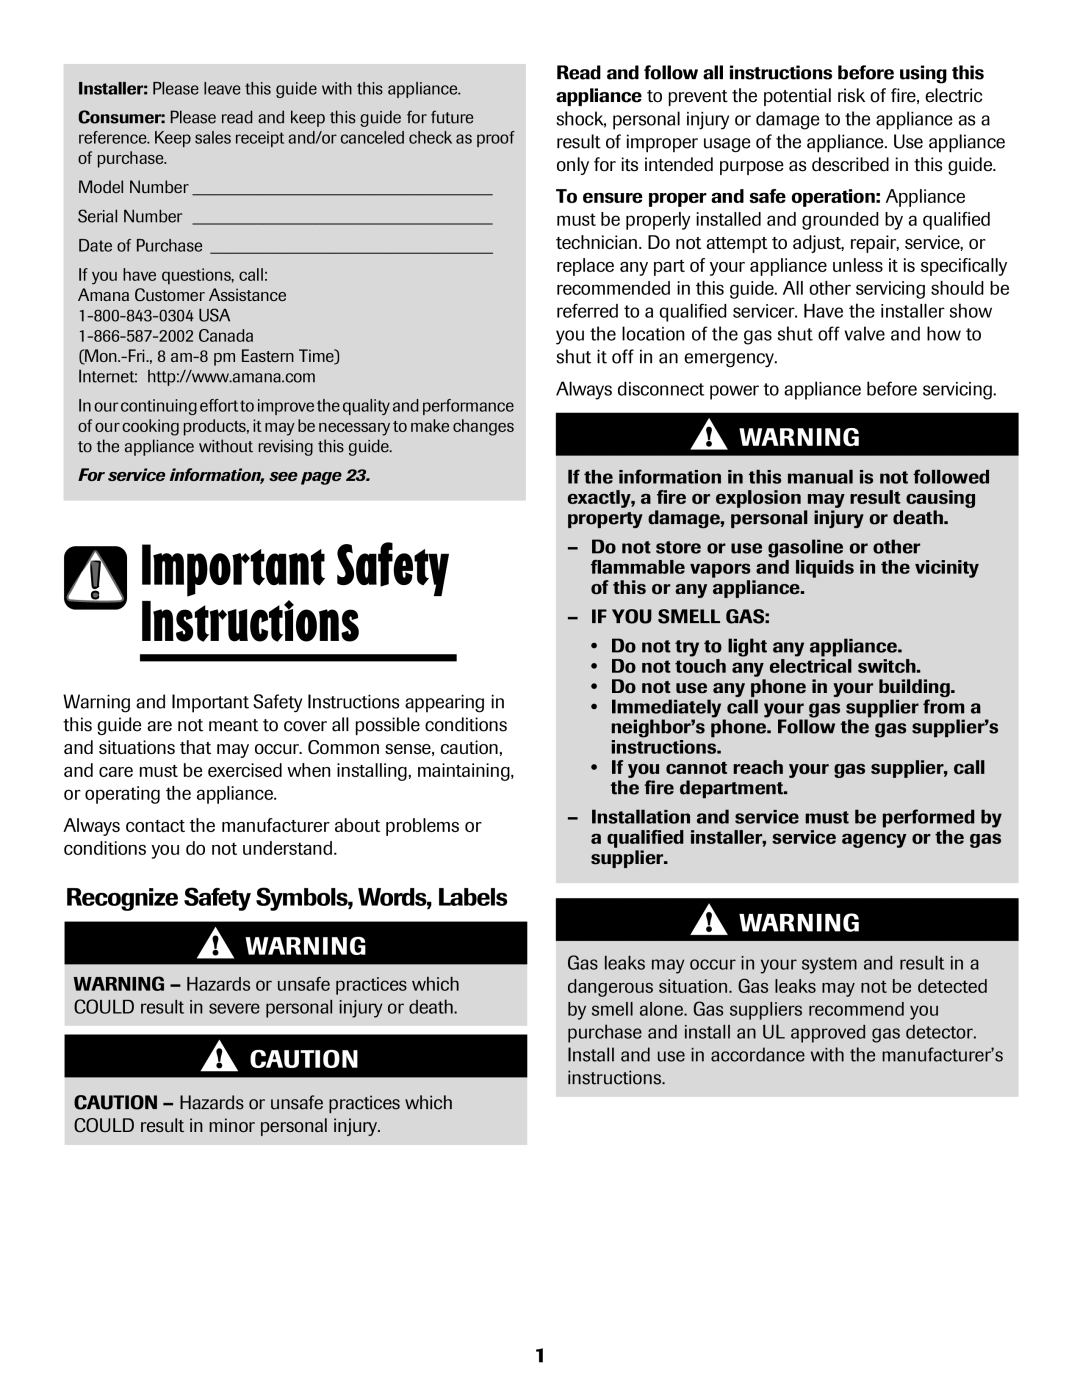 Amana 500 manual Instructions, Important Safety, Recognize Safety Symbols, Words, Labels 